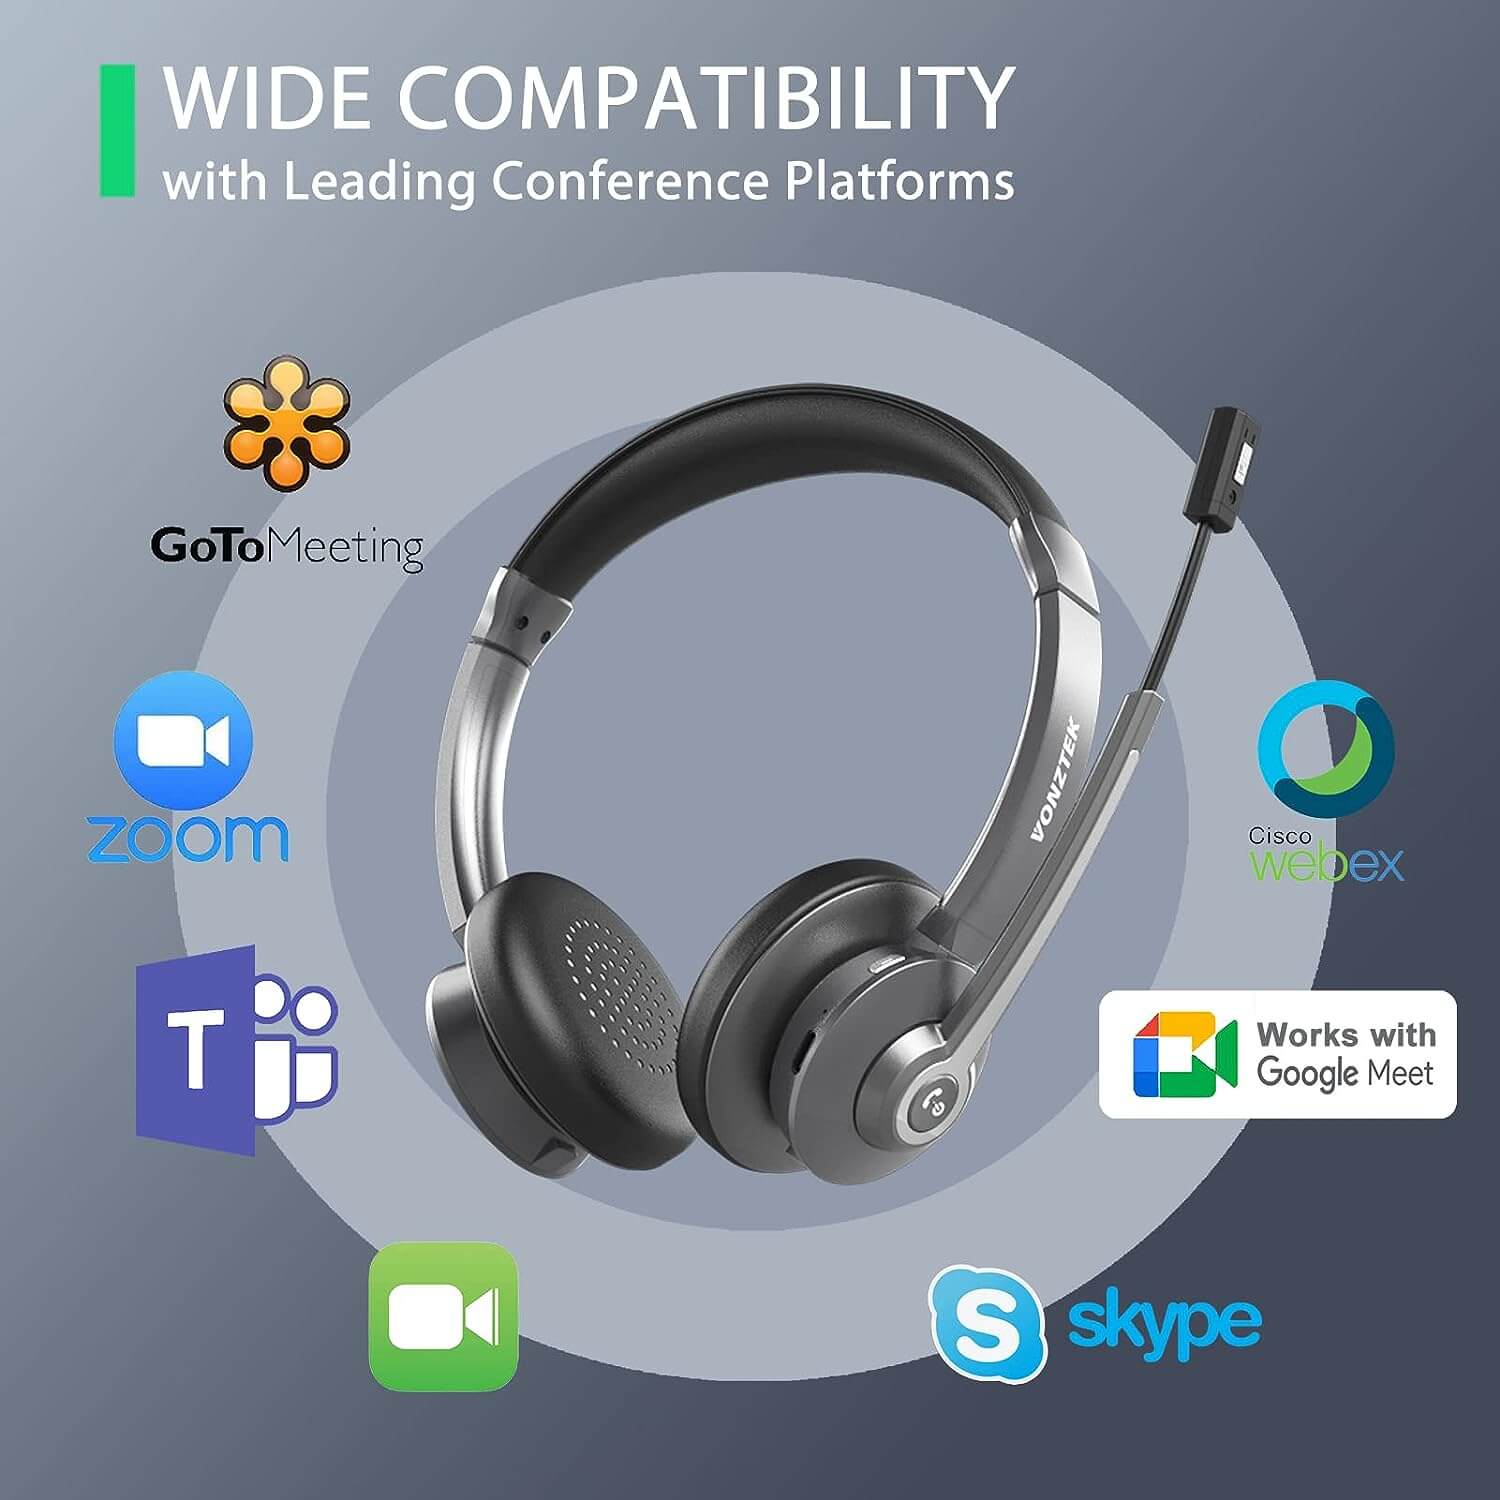 Wide compatibility with leading conference platforms,Goto meeting,Zoom,Webex,Works with google meet,Skype.